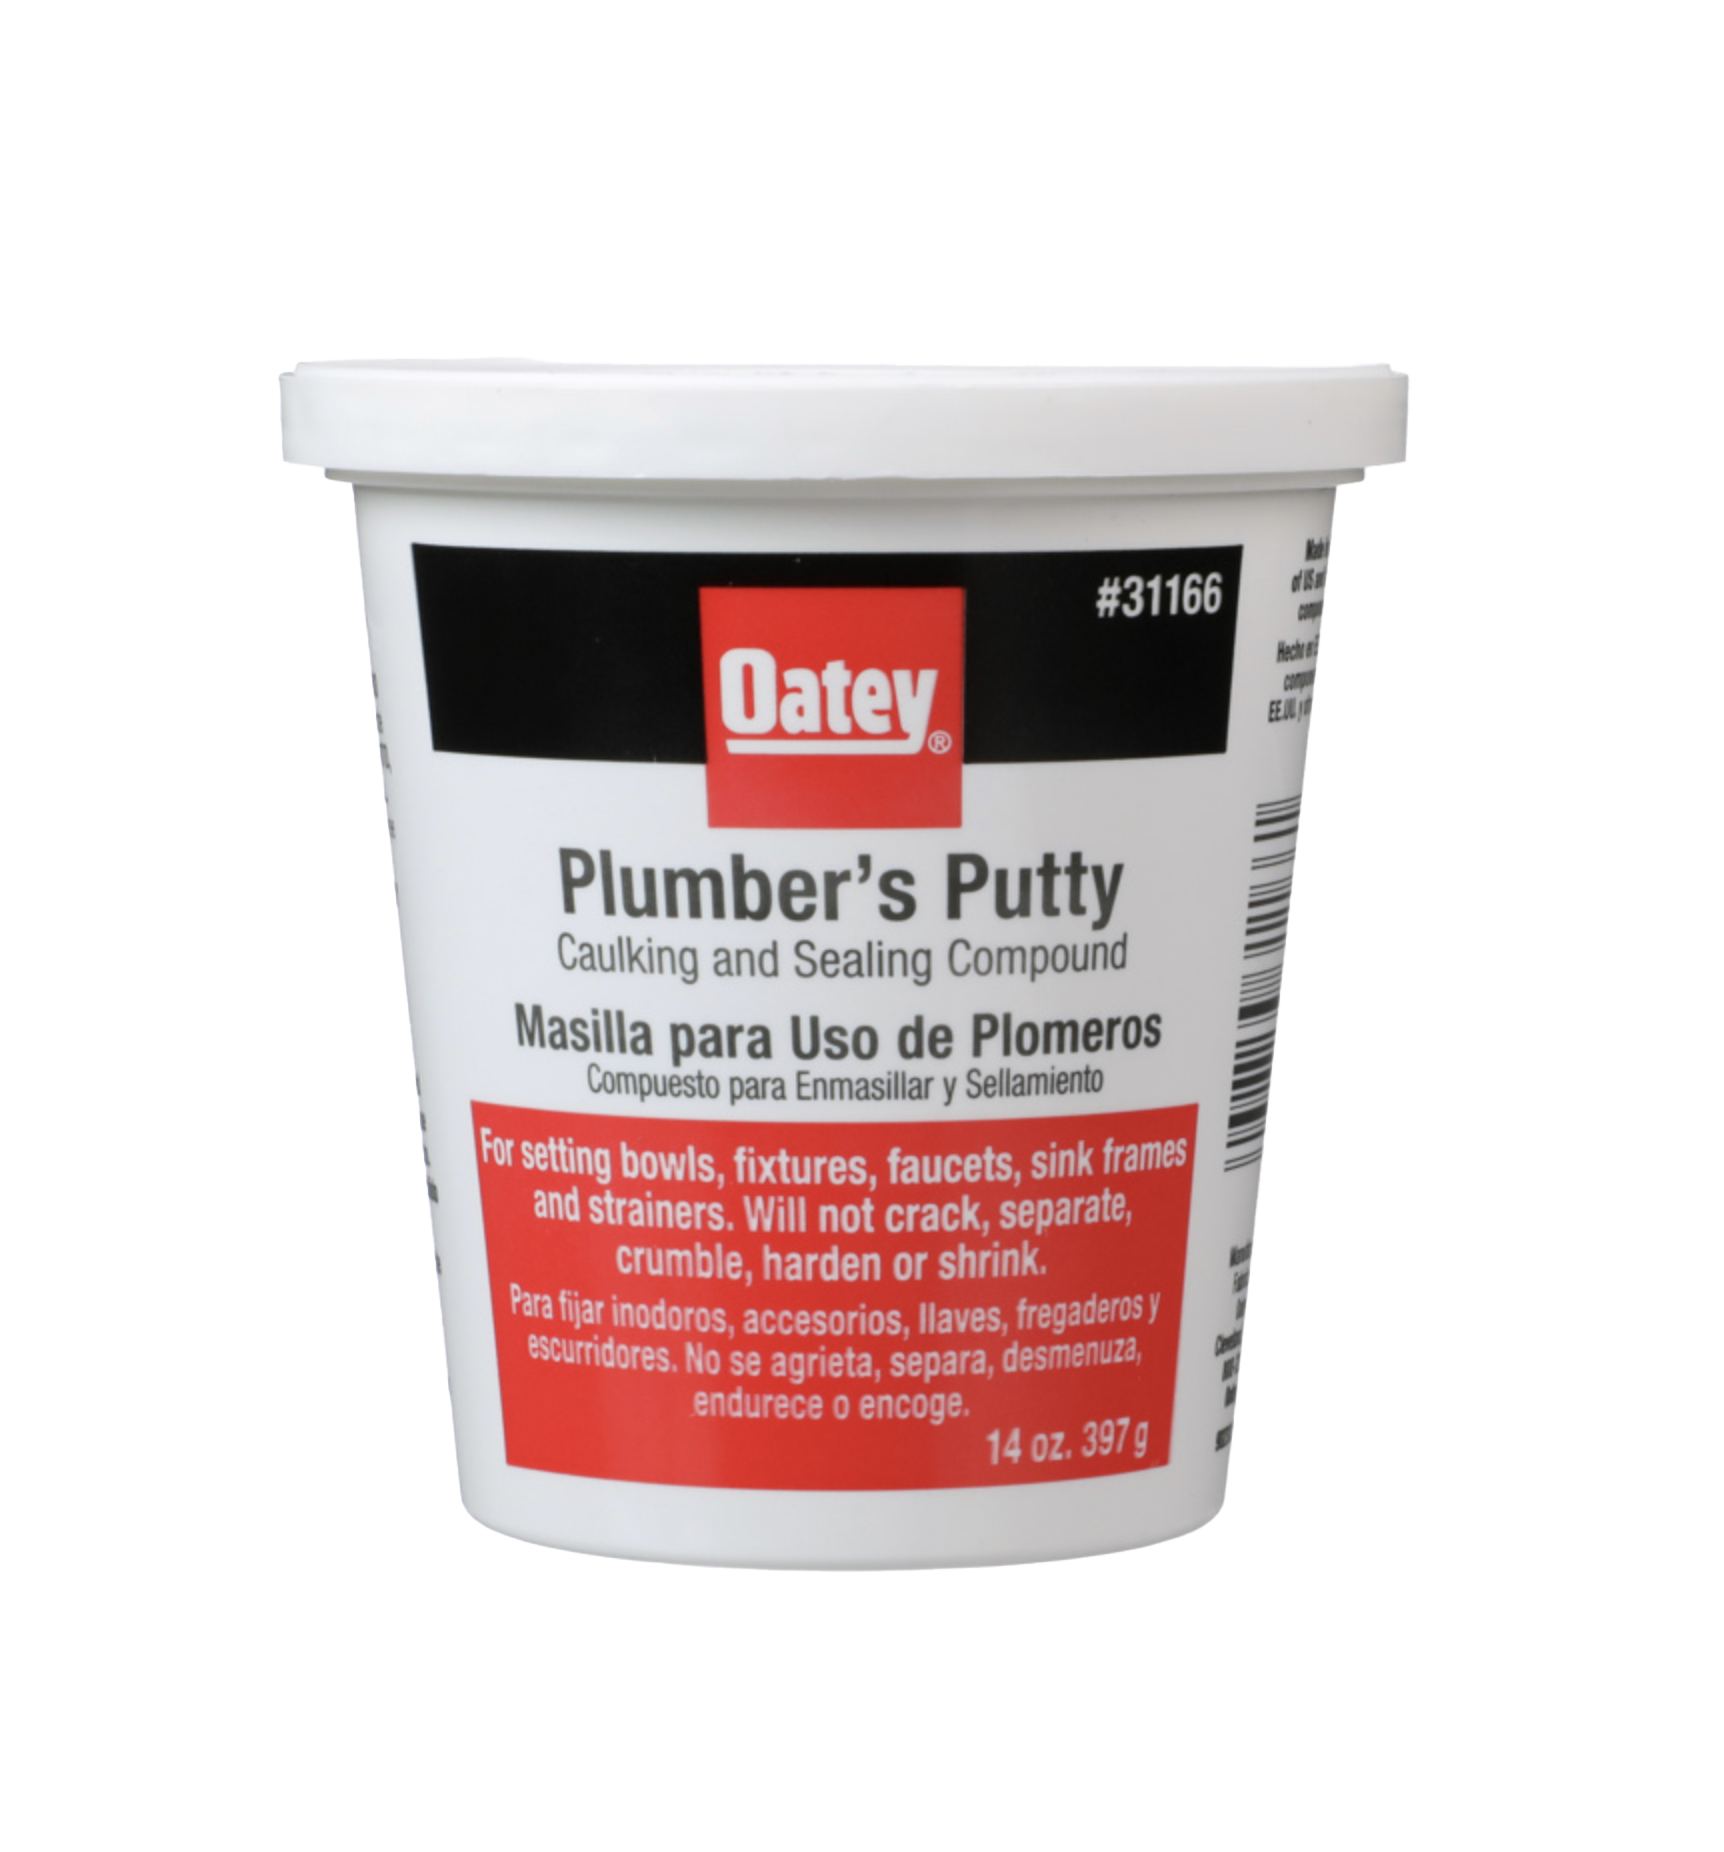 How to Properly Use Plumber’s Putty | Oatey